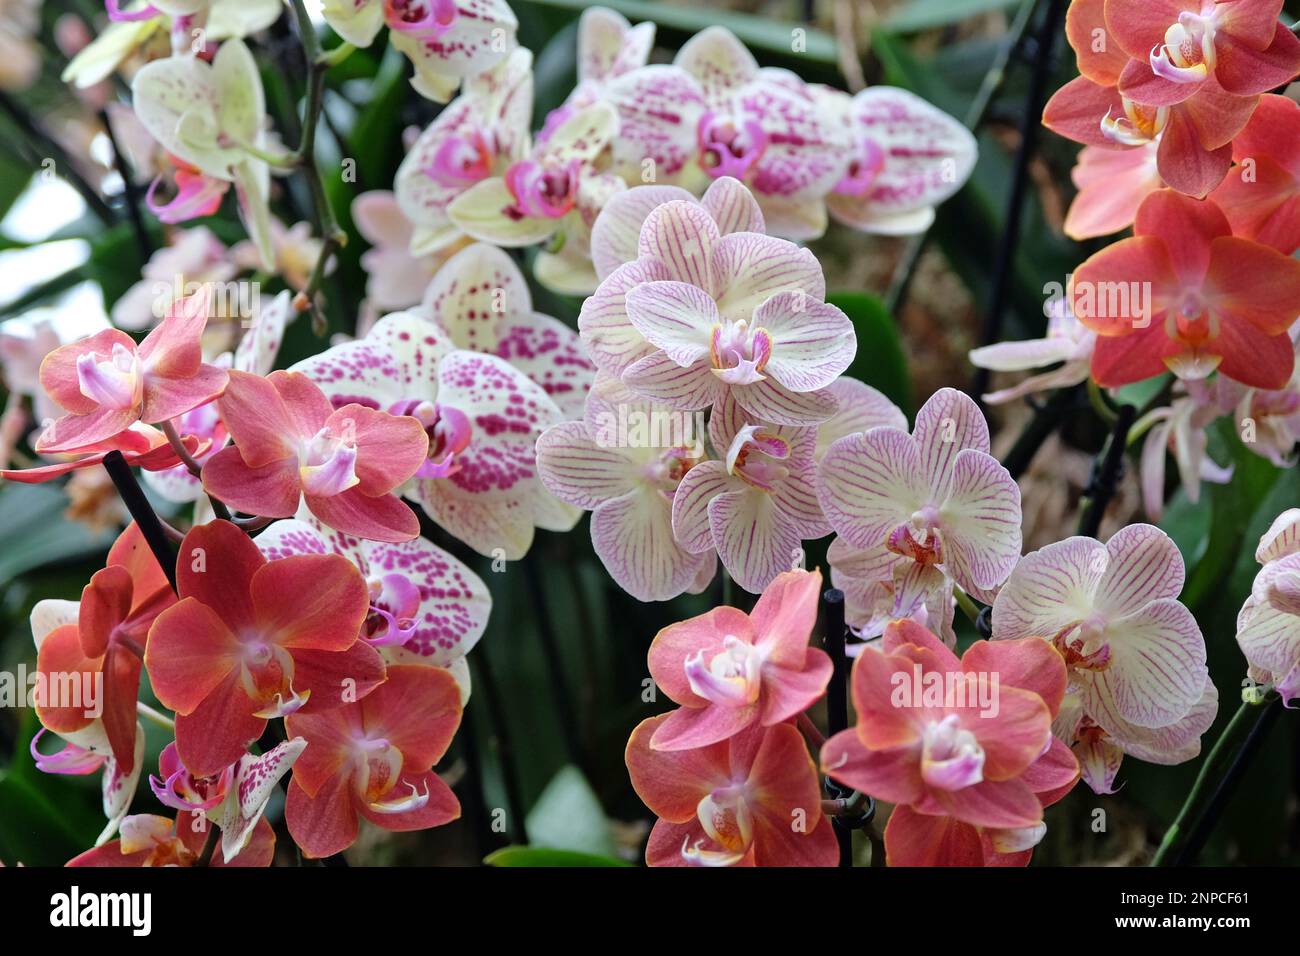 Cream and pink striped phalaenopsis moth orchids in flower. Stock Photo